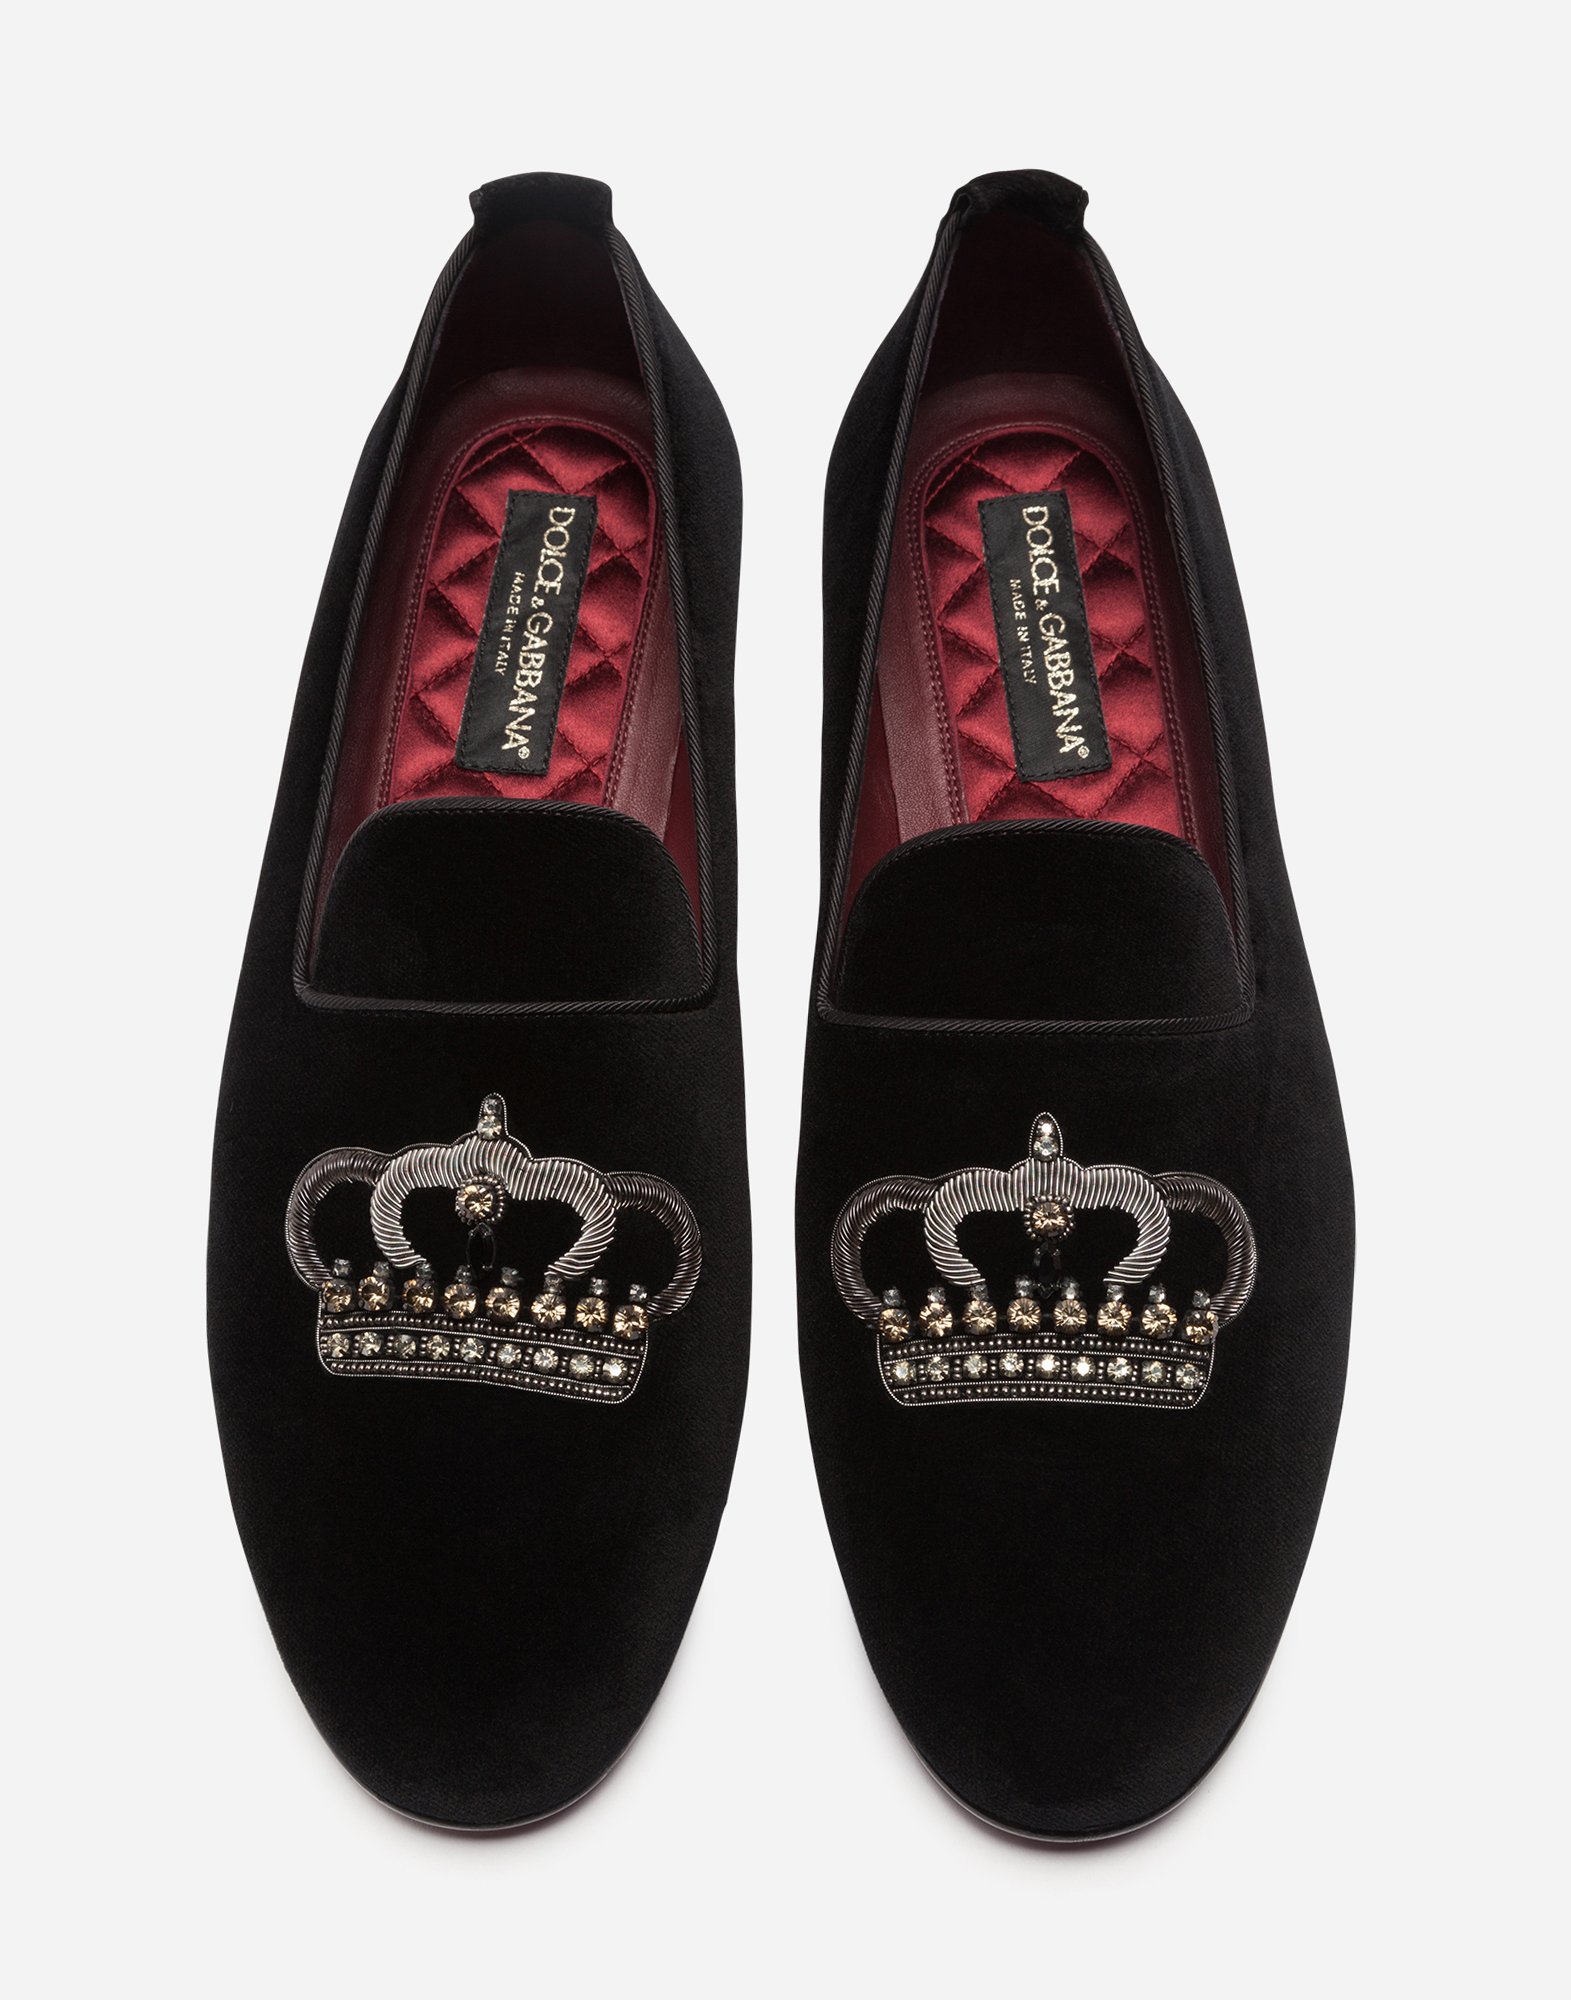 Velvet slippers with crown embroidery